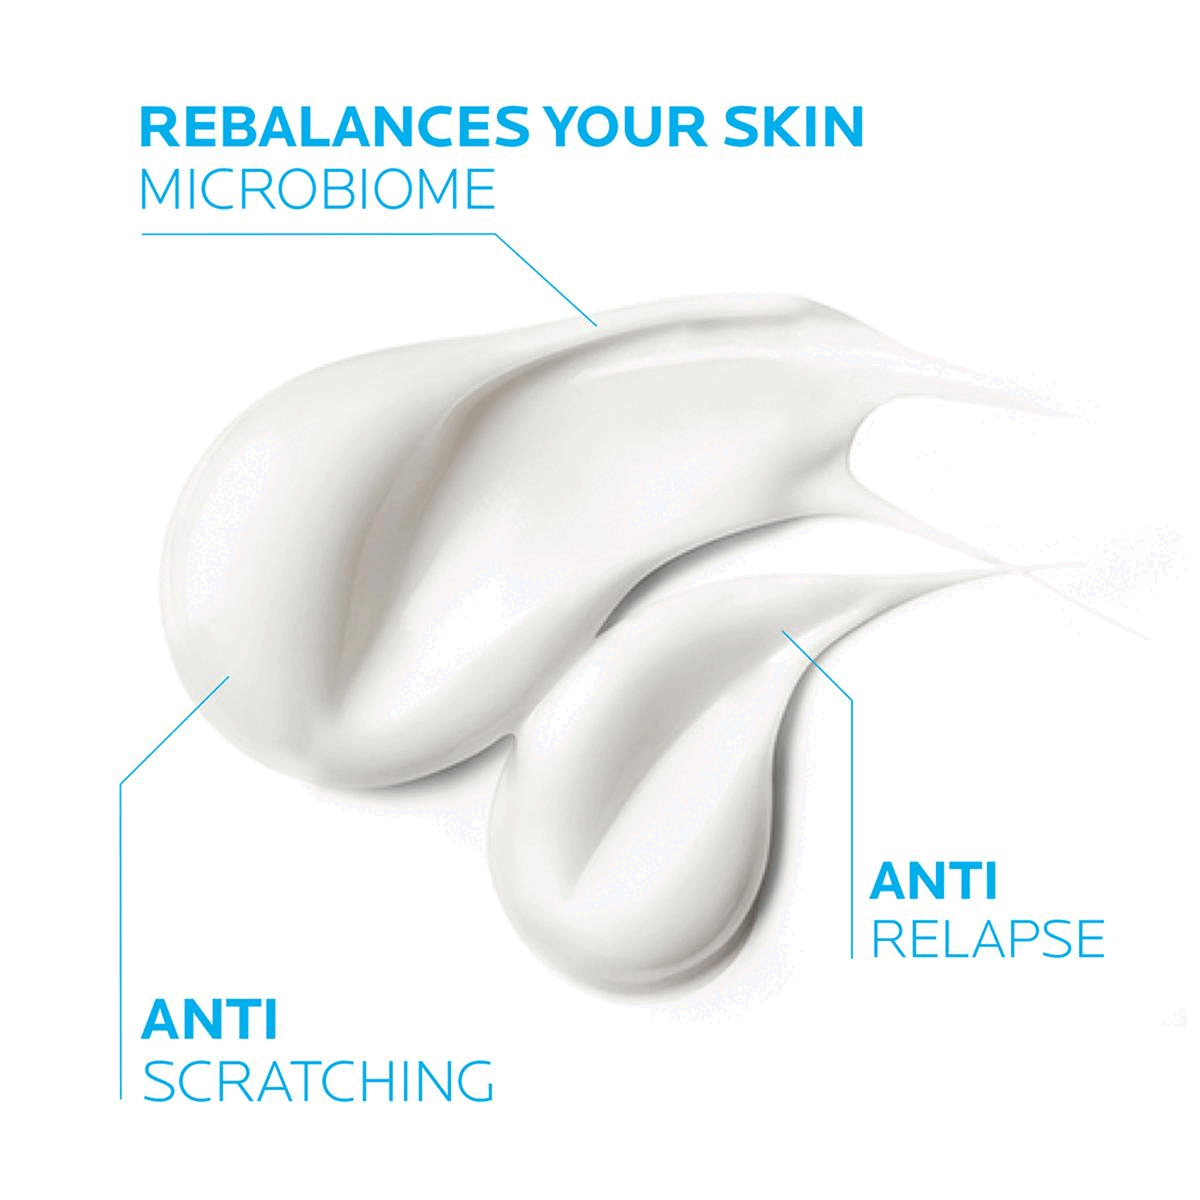 Image 1, REBALANCES YOUR SKIN MICROBIOME ANTI RELAPSE ANTI SCRATCHING Image 2, SHEA BUTTER DRY SKIN Restores the skin's hydrolipidic film to repair the skin barrier AQUA POSAE PREBIOTIC Rebalances the microbiome for a healthier skin NIACINAMIDE SENSITIVE SKIN Intensely soothes the skin, reduces irritations and redness Image 3, DERMATOLOGIST RECOMMENDED DERMOCOSMETIC BRAND WORLDWIDE